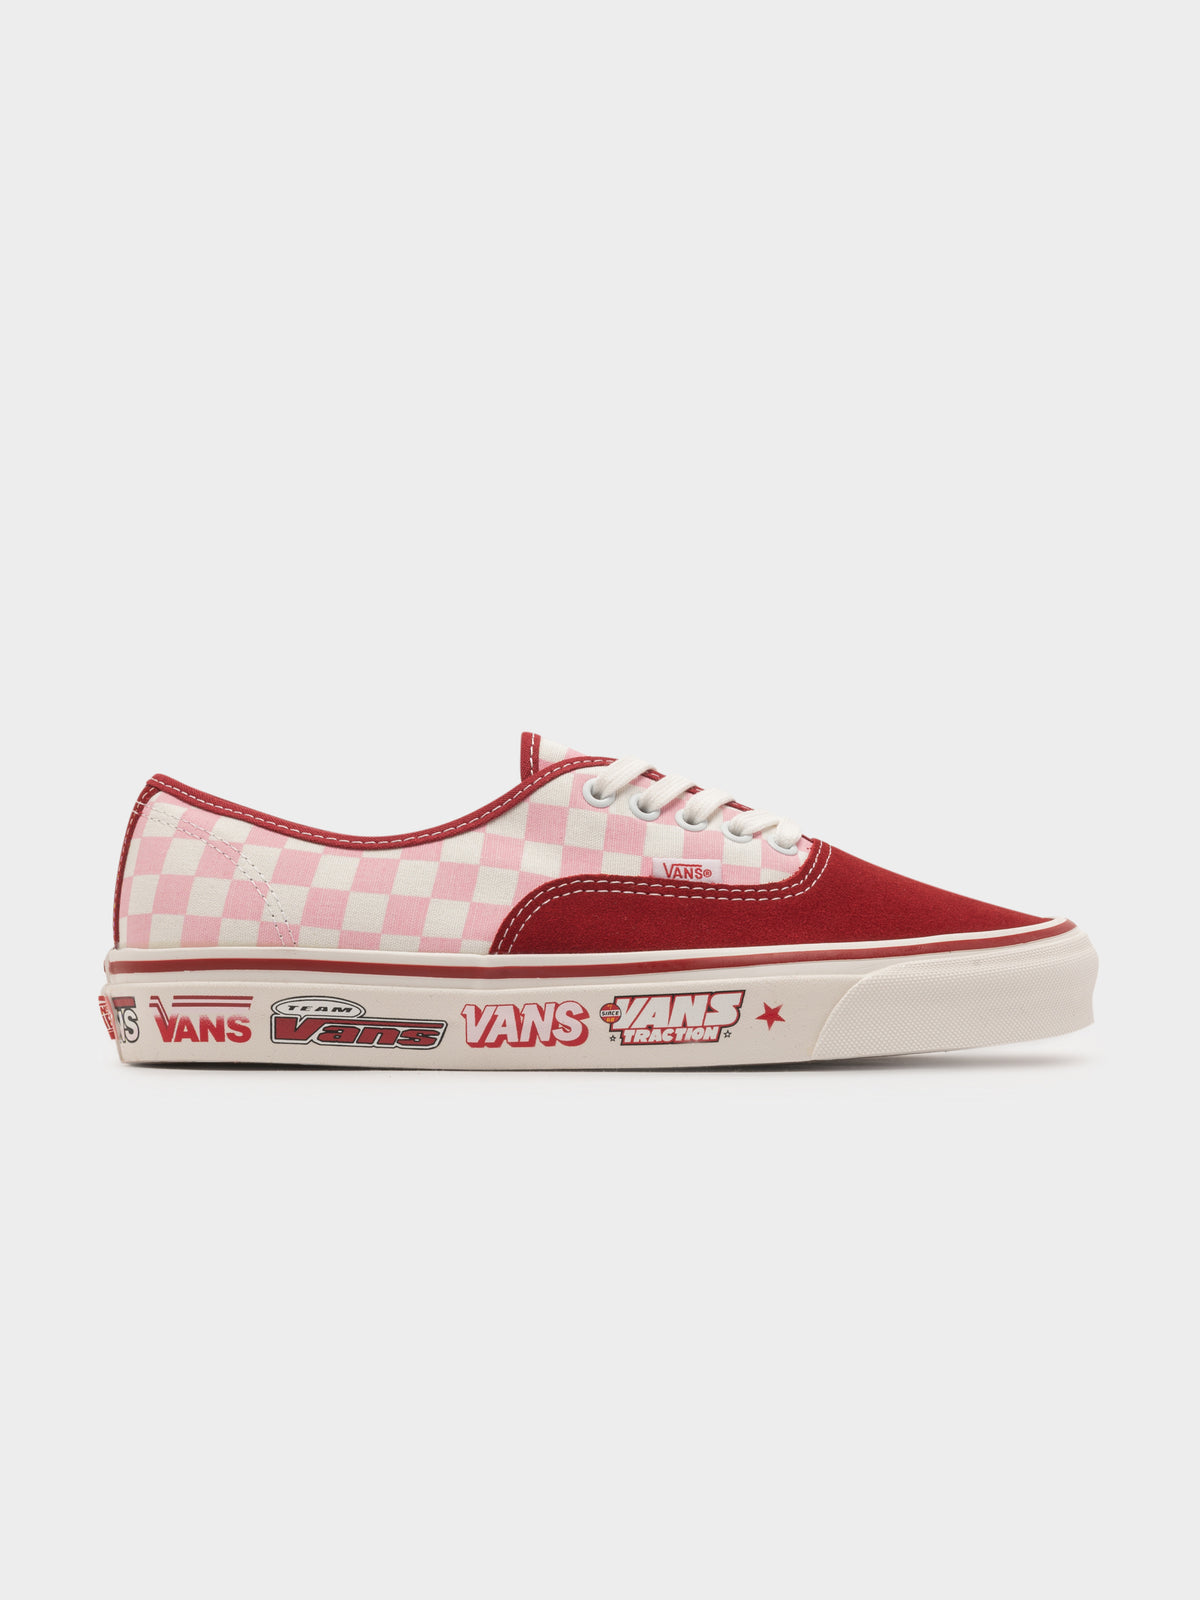 Unisex Authentic 44 DX Anaheim Sneakers in Chili Pepper